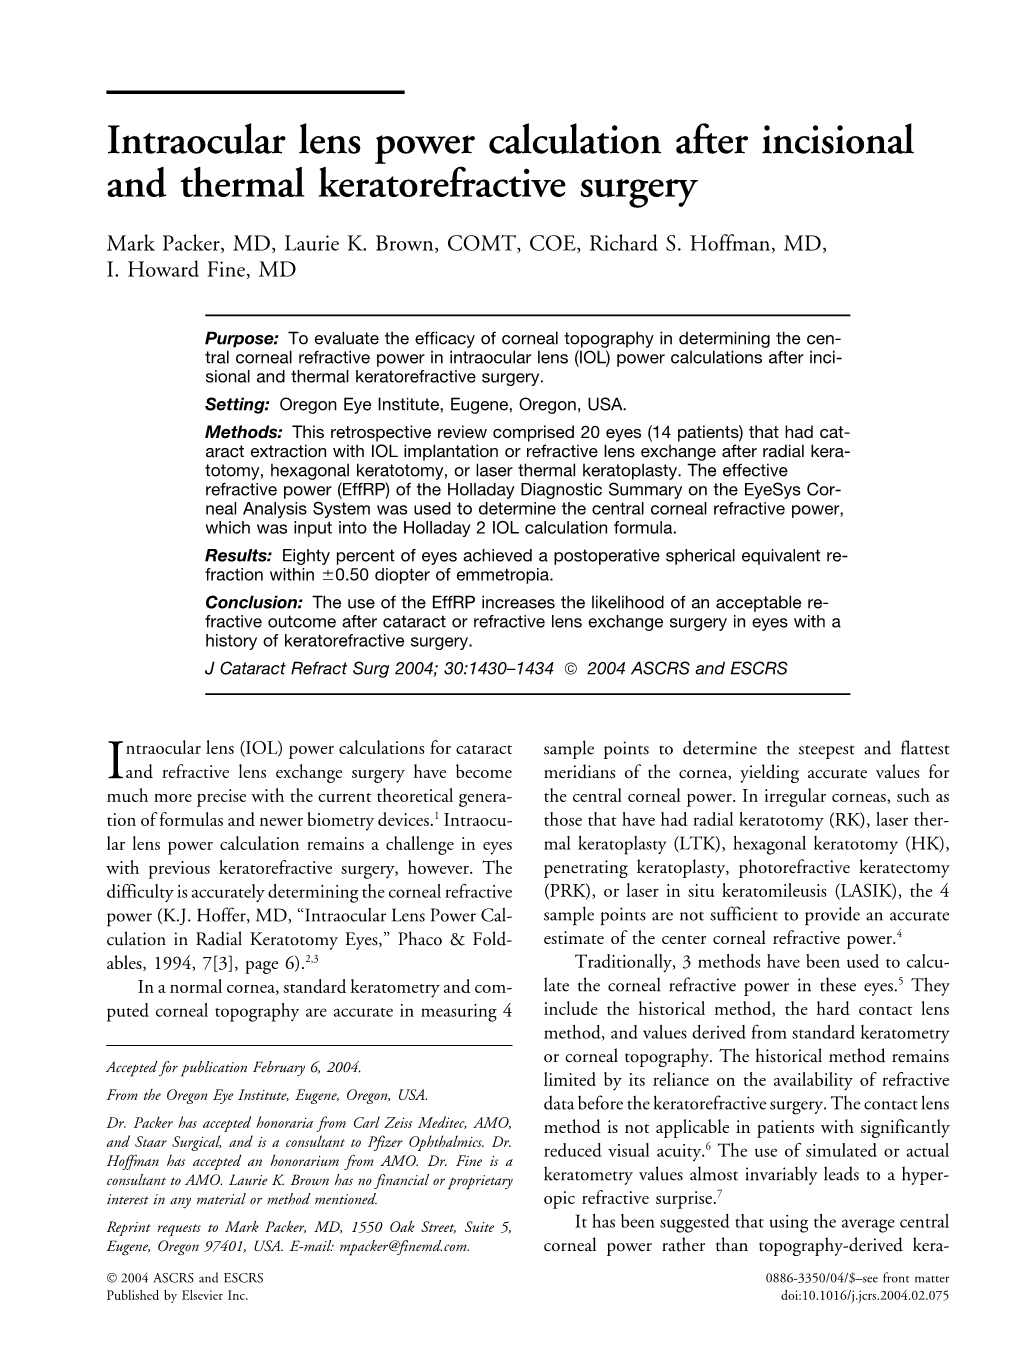 Intraocular Lens Power Calculation After Incisional and Thermal Keratorefractive Surgery